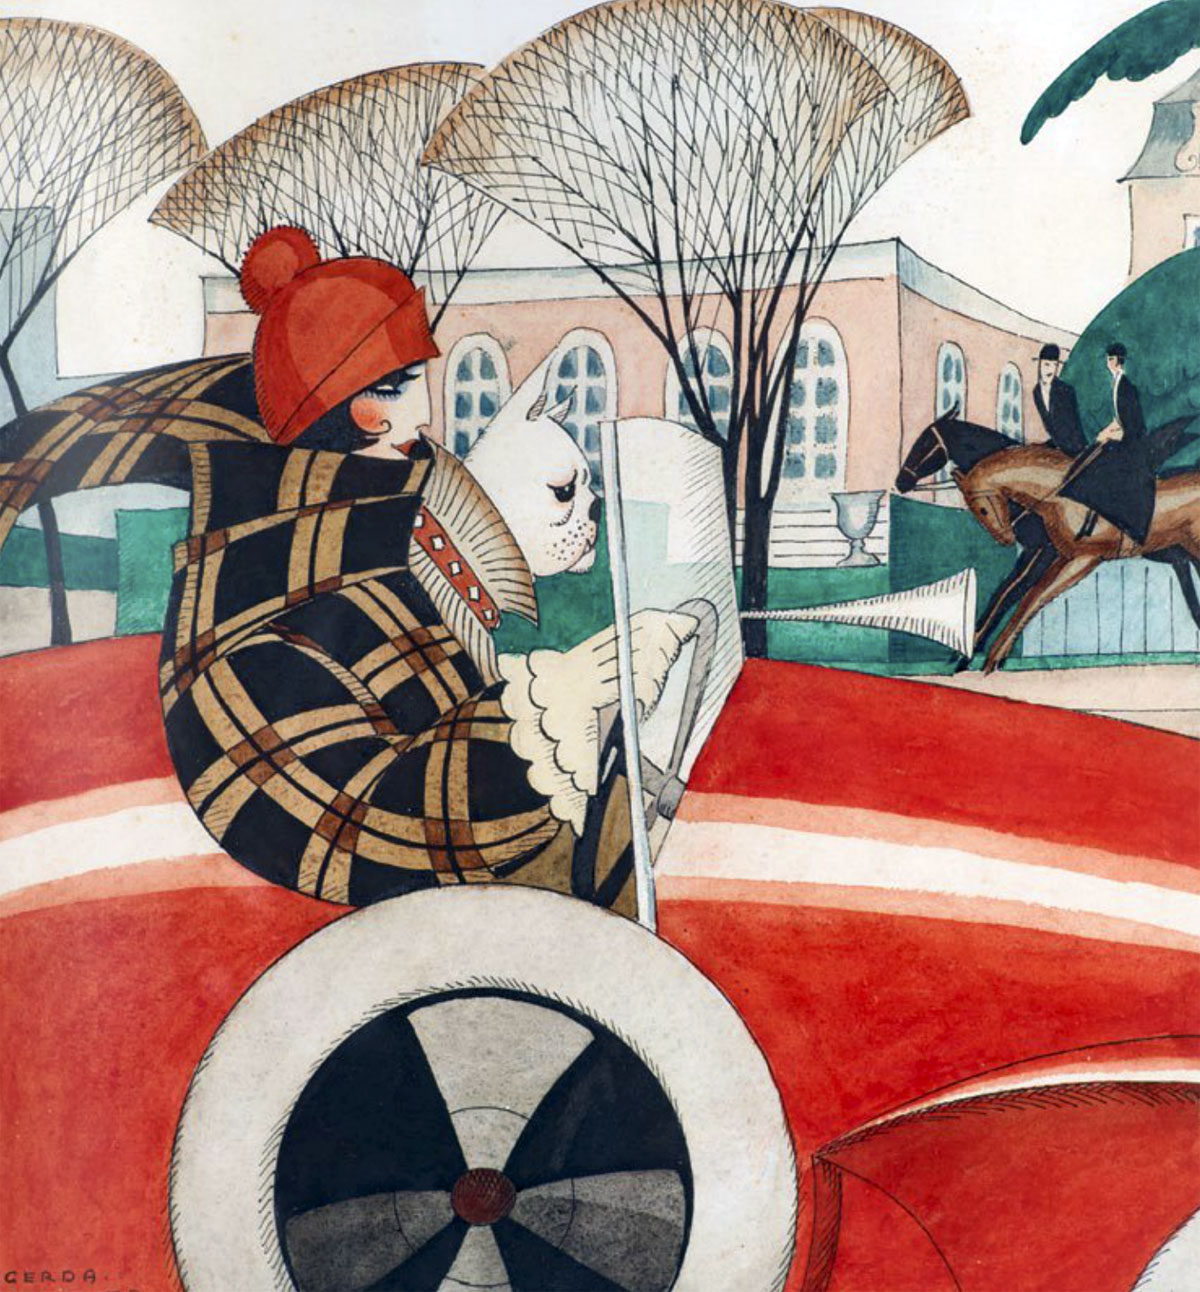 Girl and Pug in an Automobile by Gerda Wegener - 1927 private collection